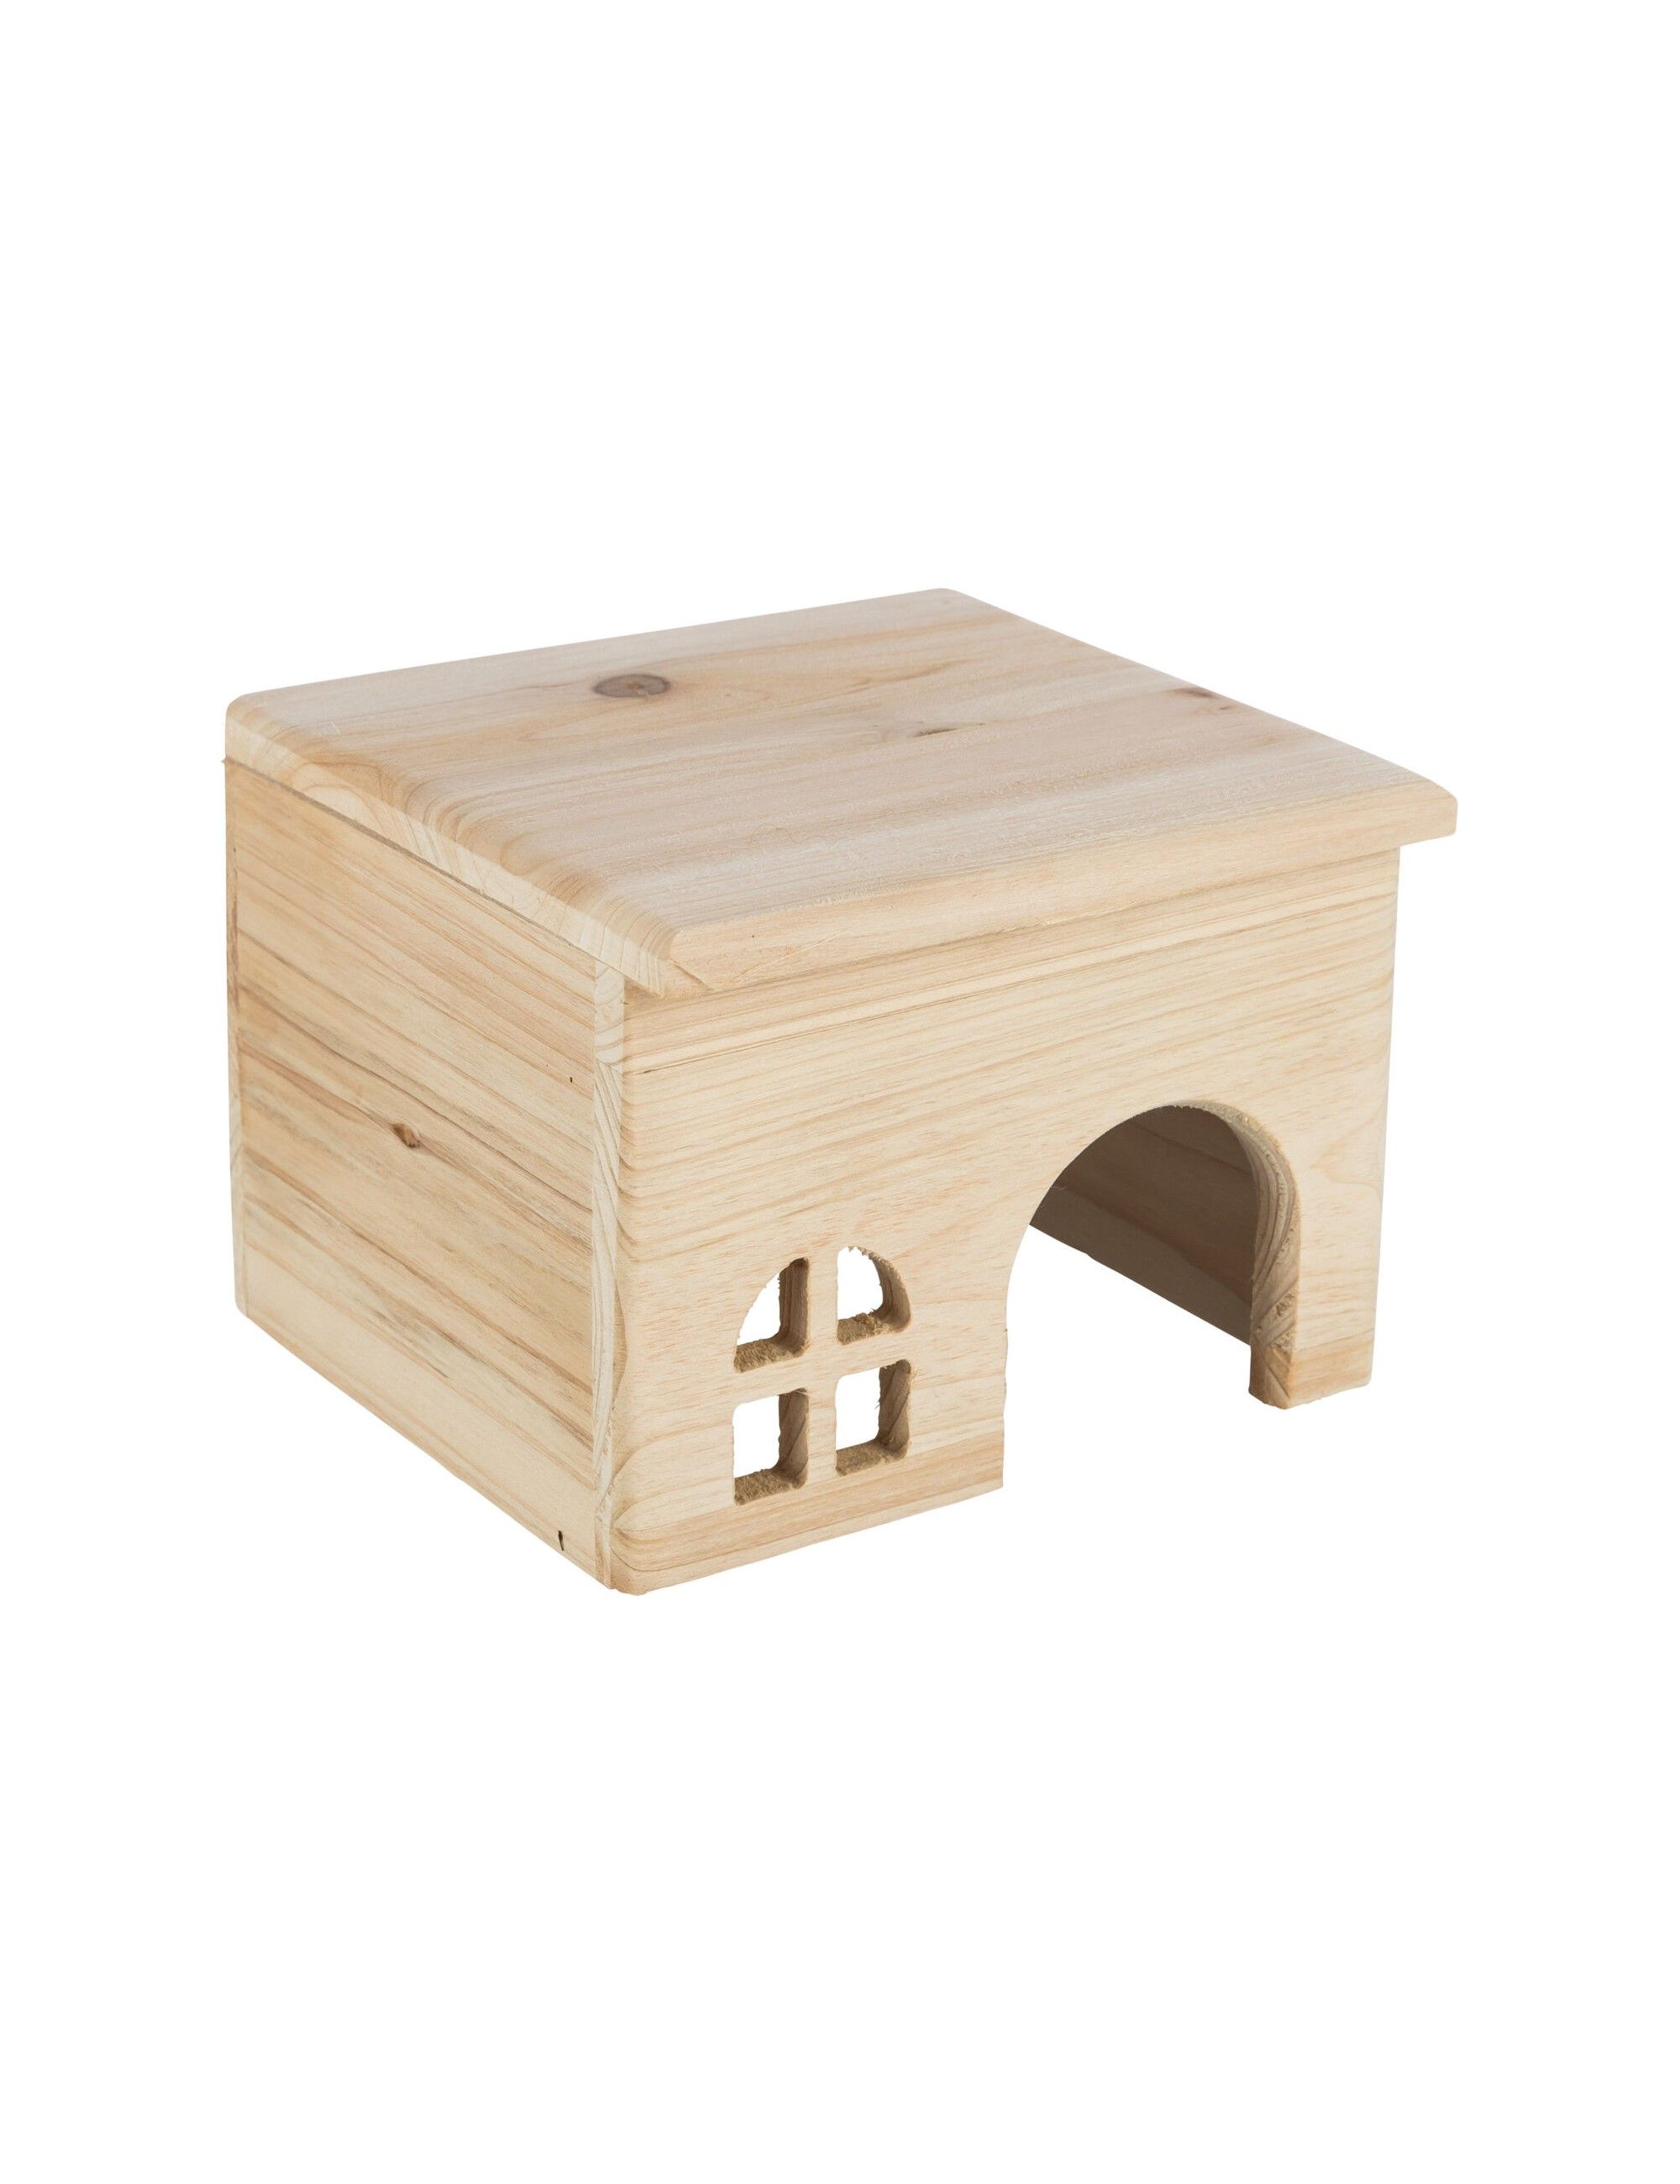 TRIXIE - Wooden house for rabbits and rodents